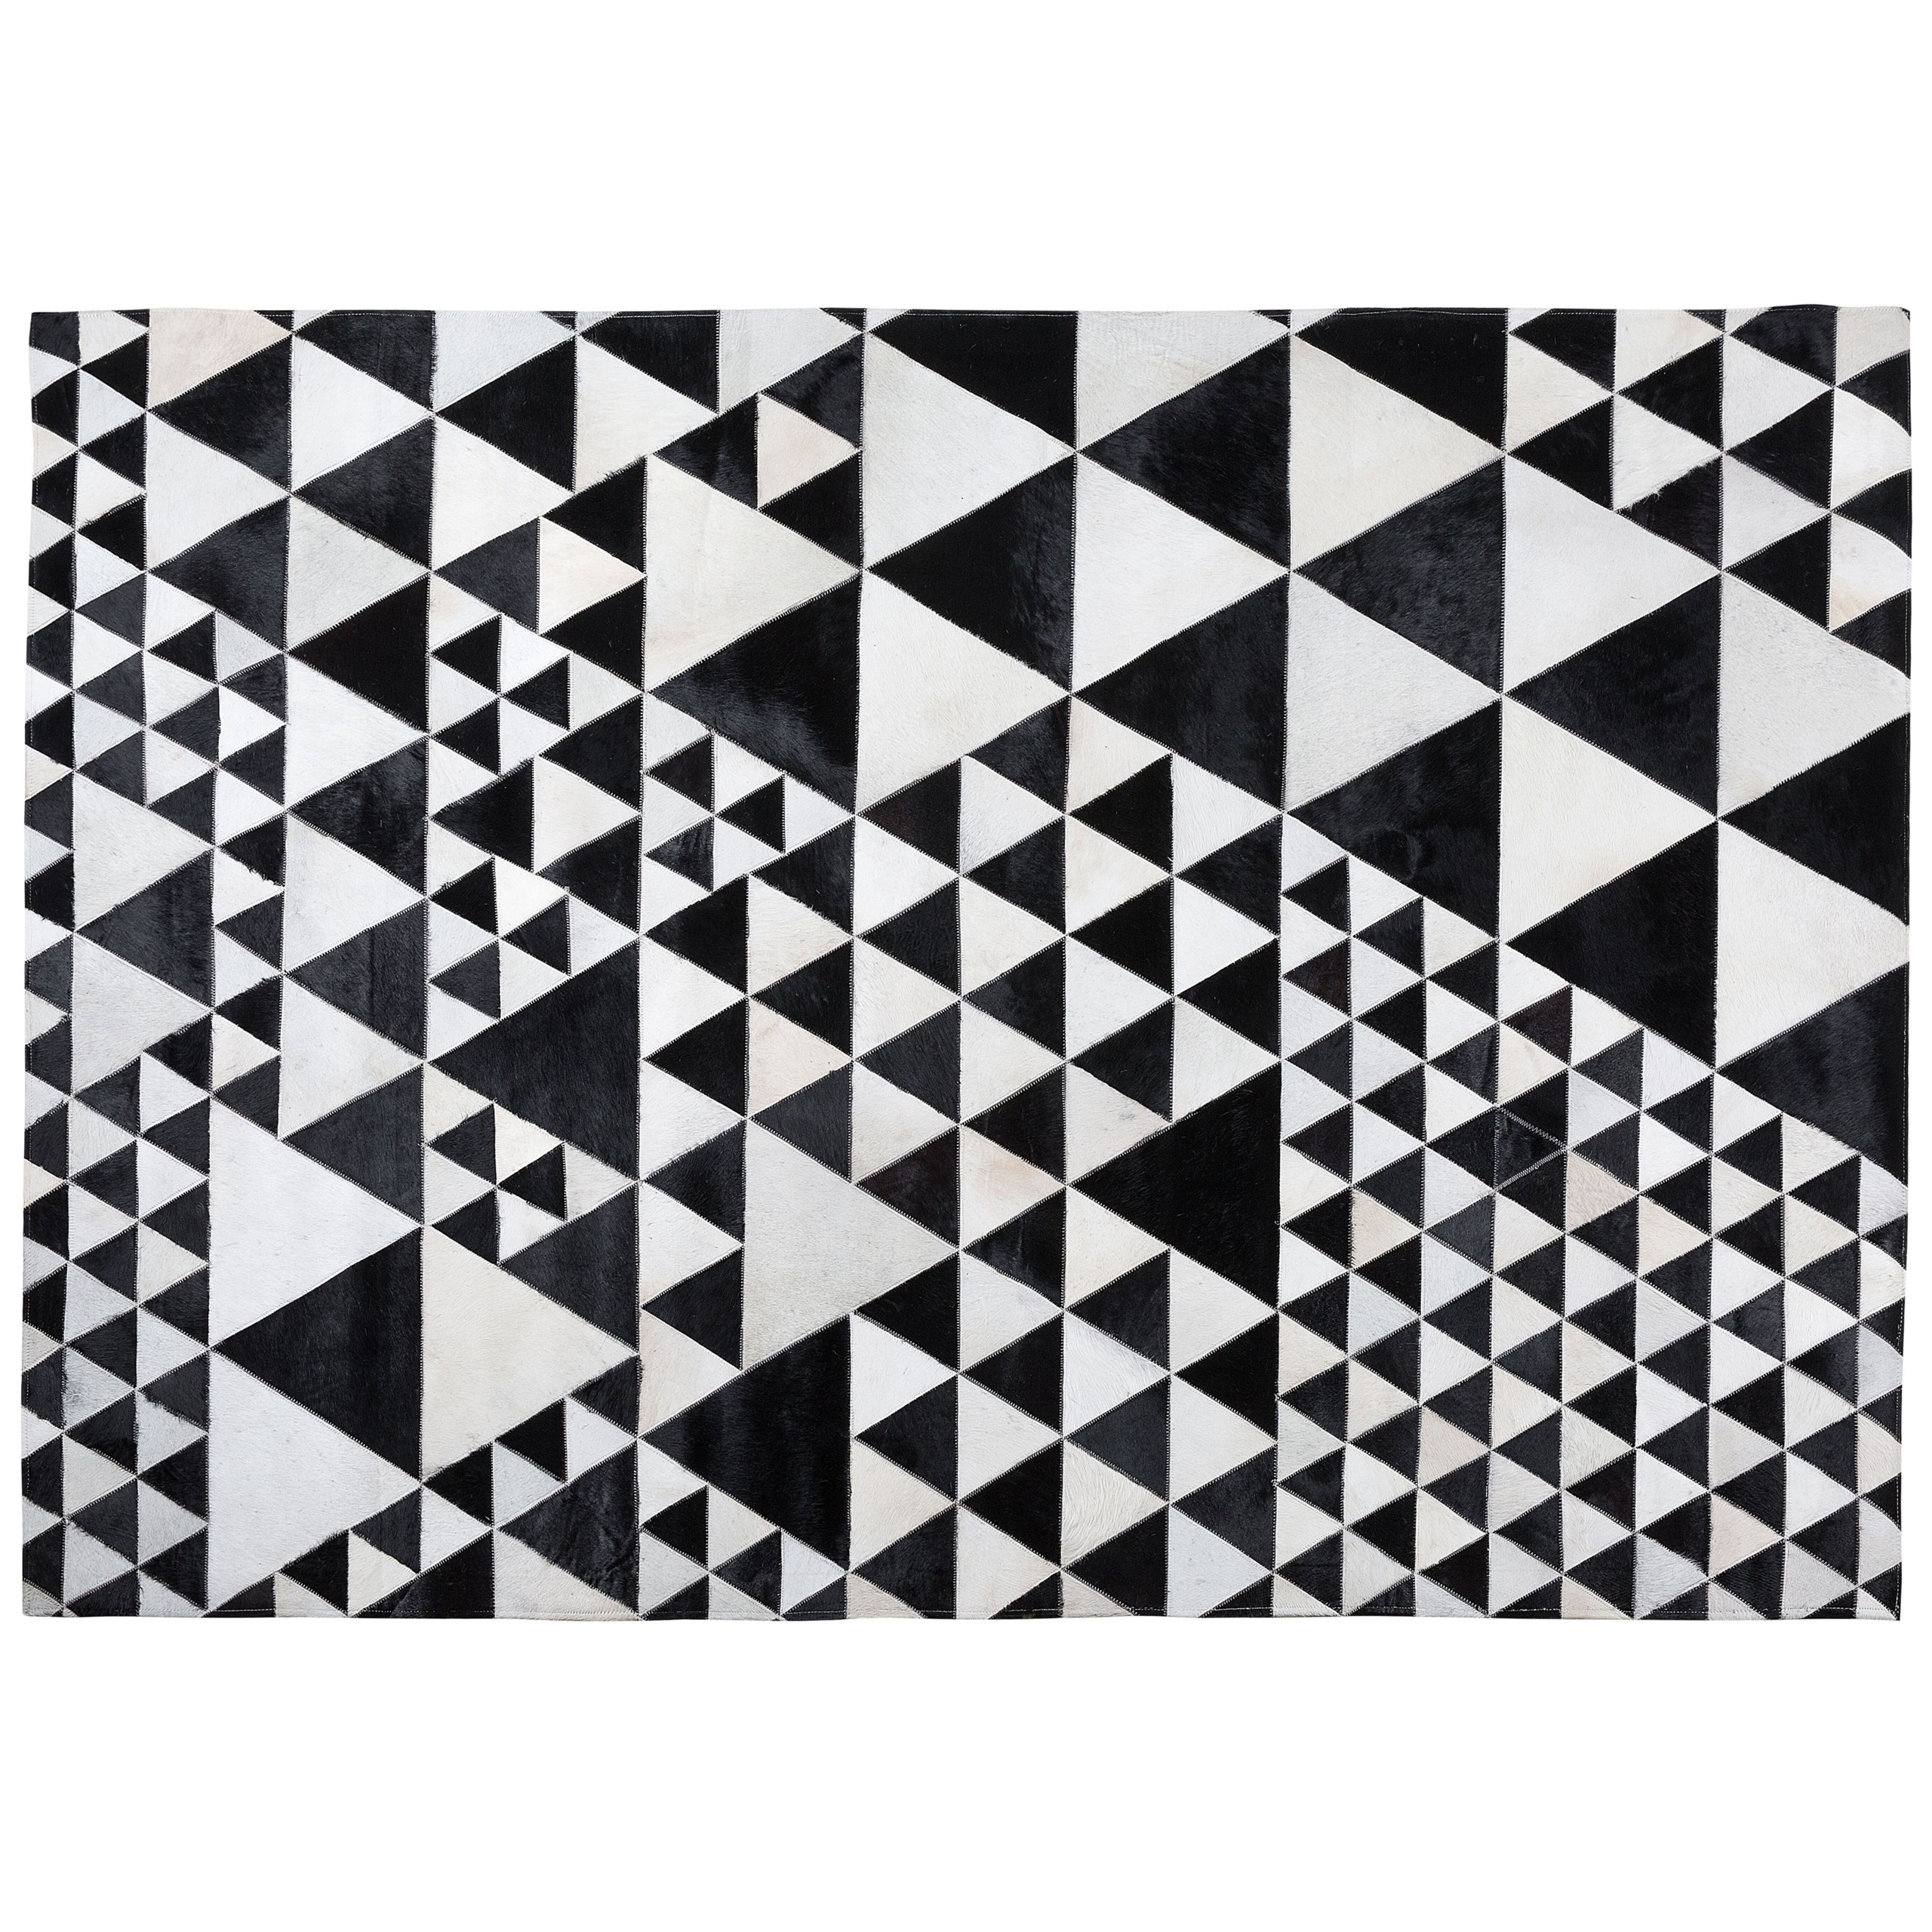 Beliani Rug Black and White Leather 160 x 230 cm Handcrafted Modern